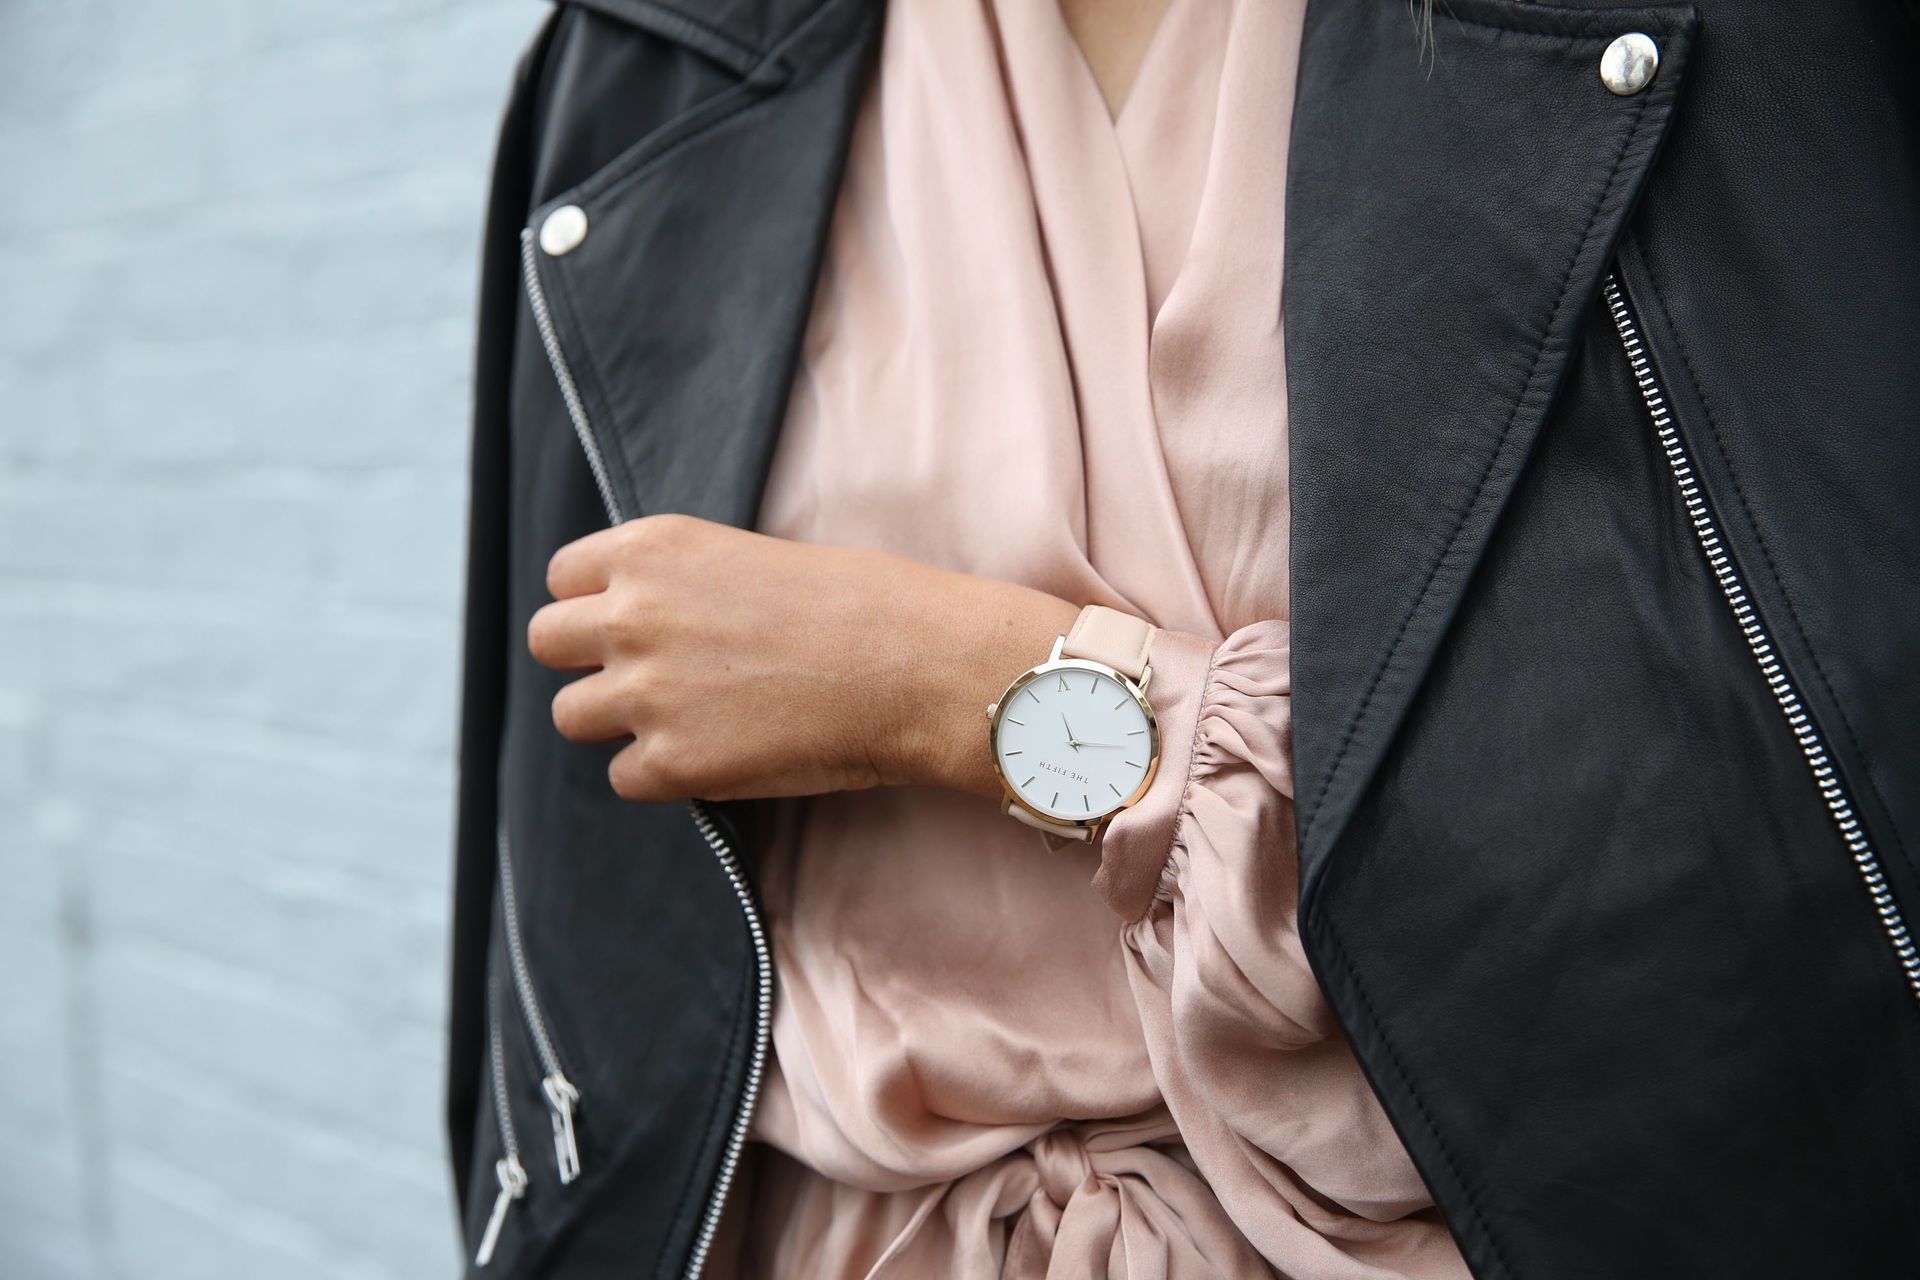 A woman wearing a leather jacket and a watch on her wrist.